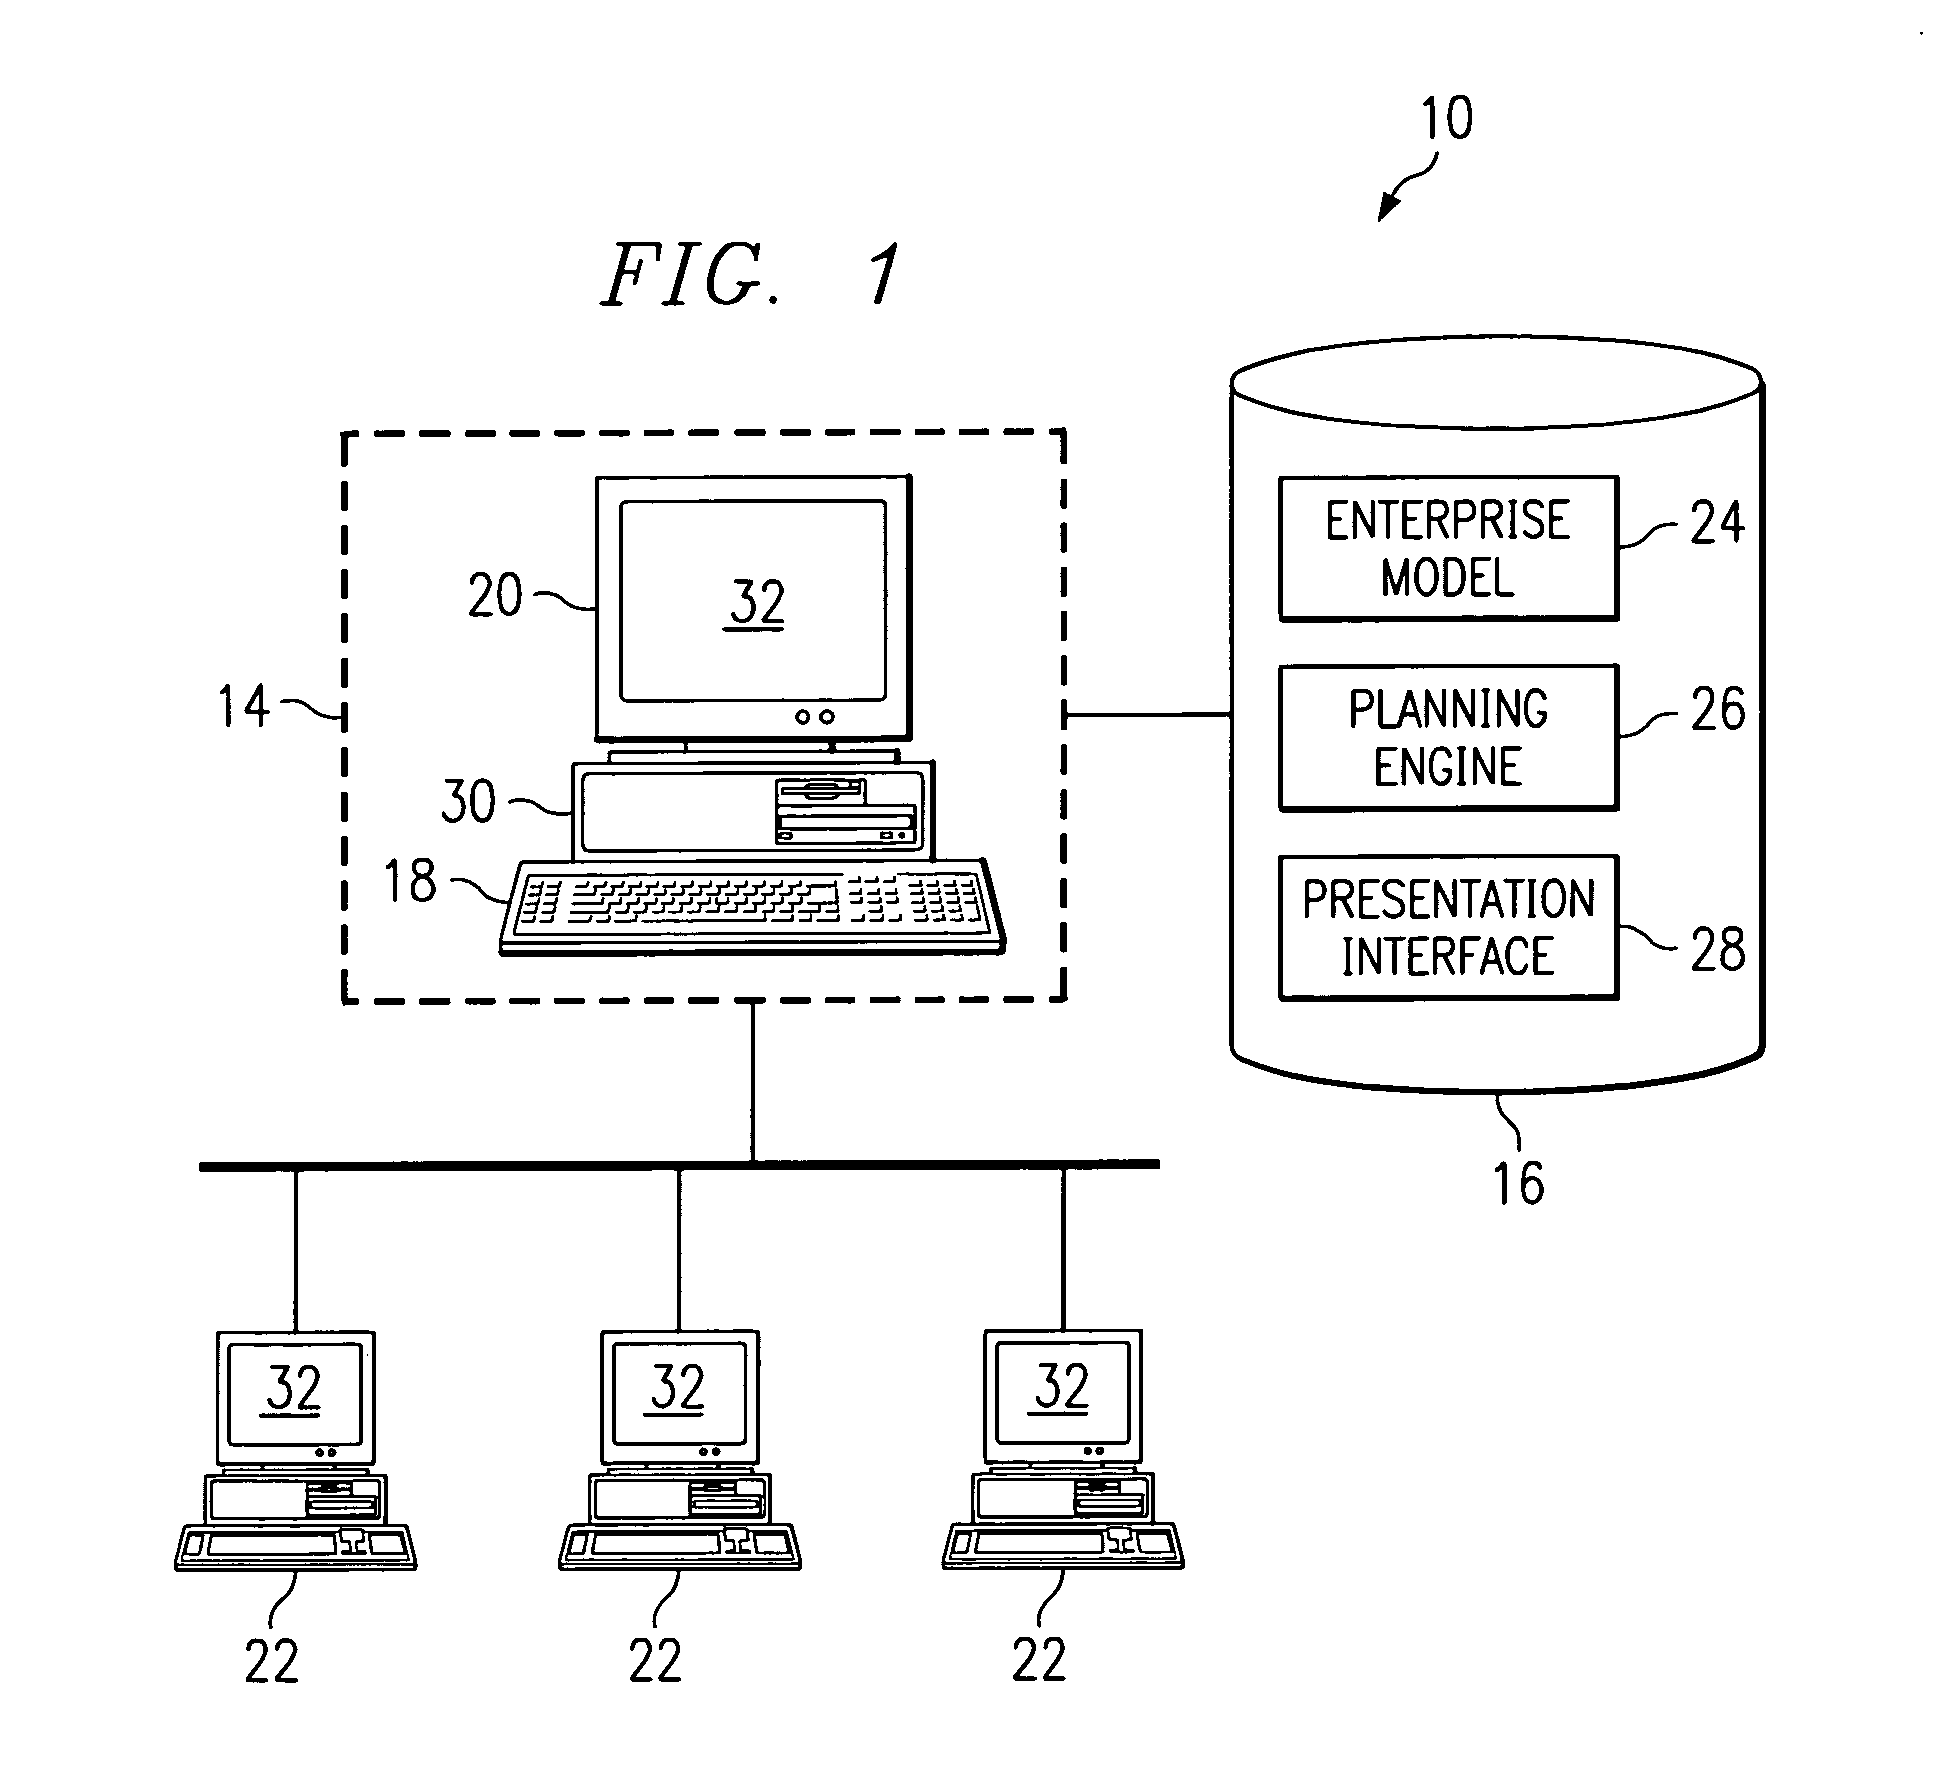 System and method for displaying planning information associated with a supply chain